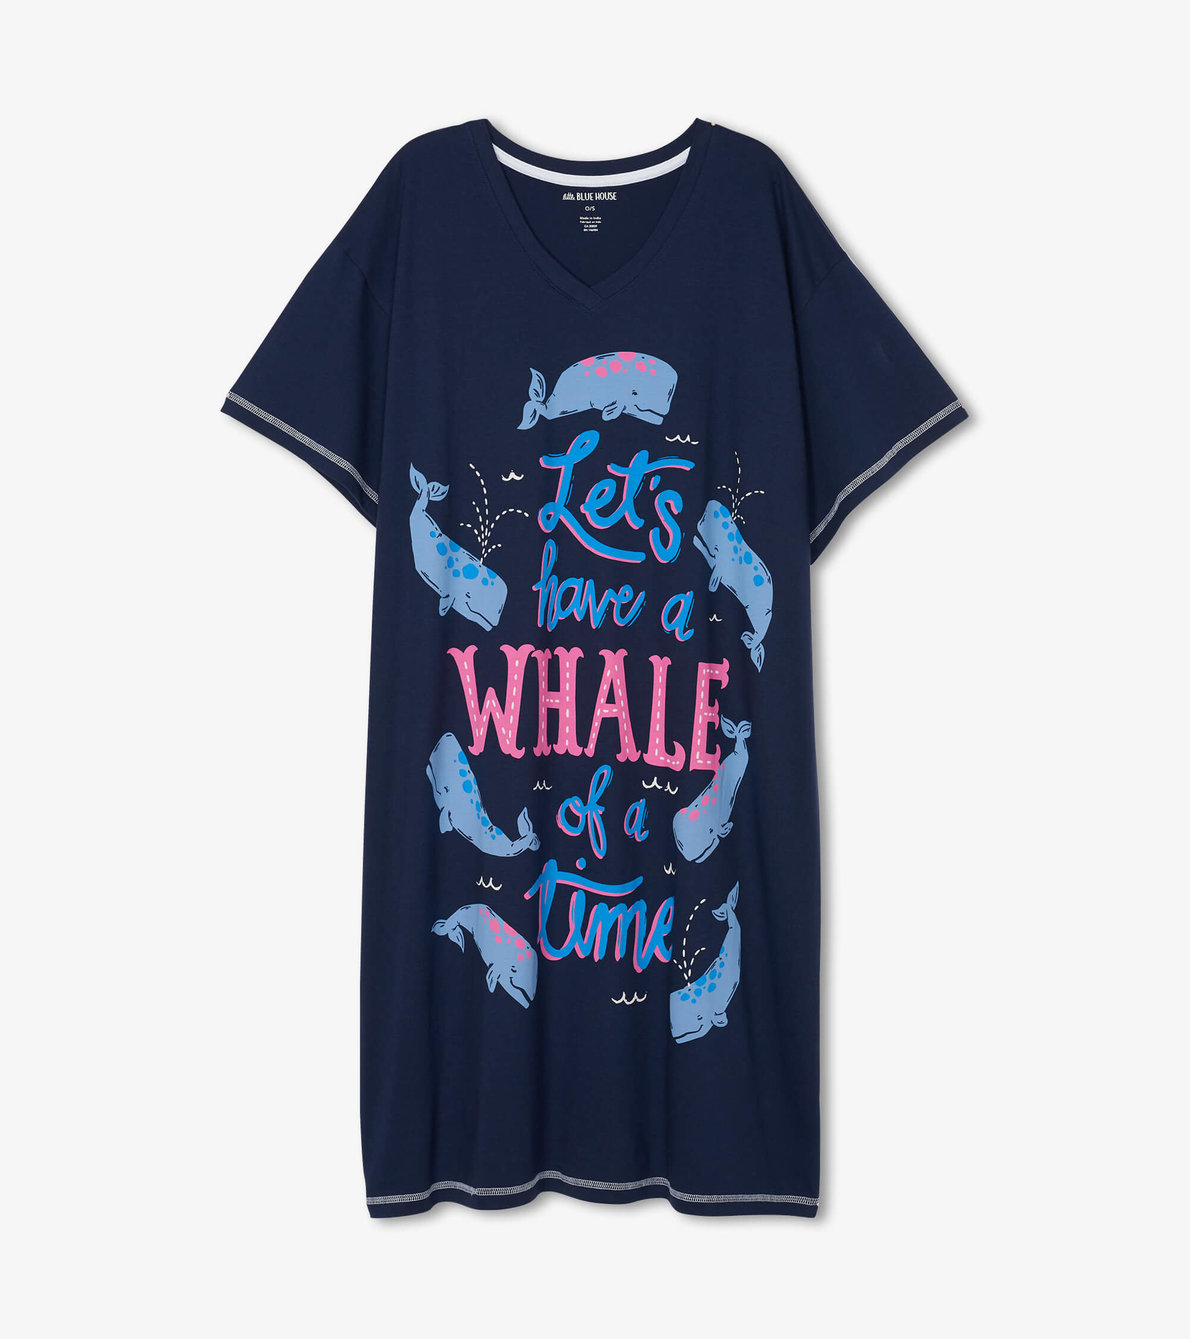 View larger image of Whale of a Day Women's Sleepshirt